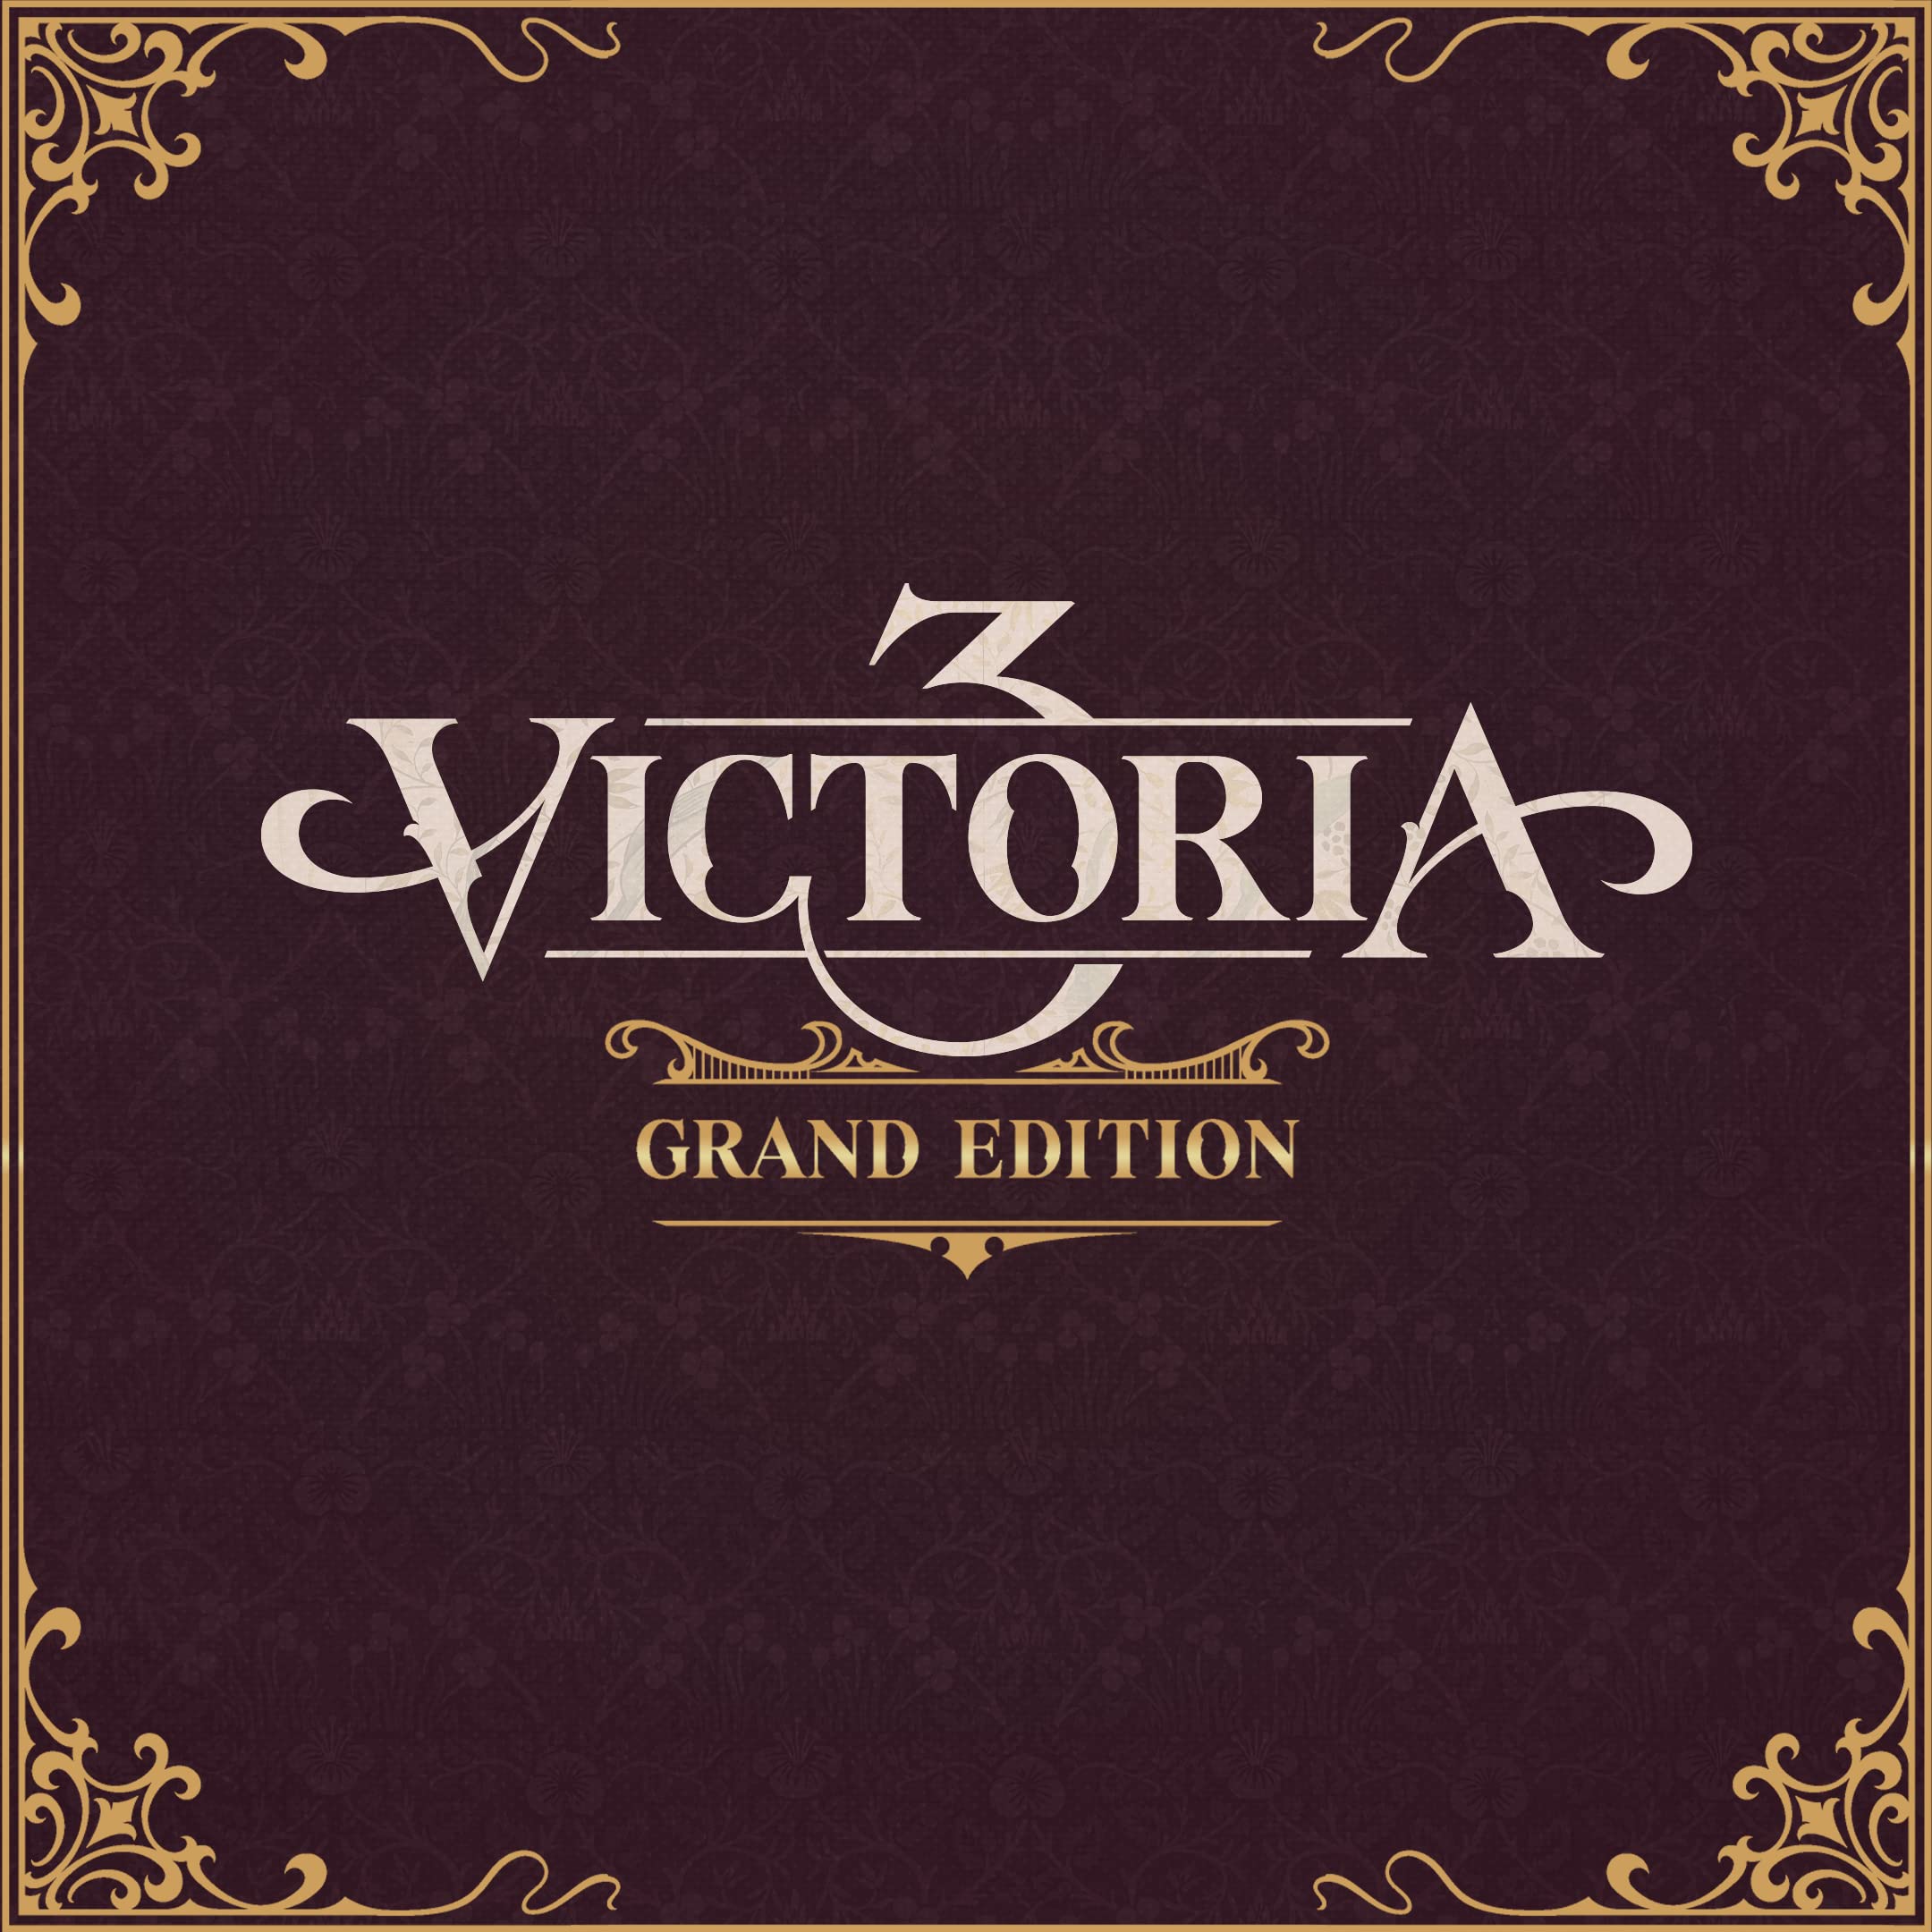 Victoria 3: Grand Edition Deluxe - PC [Online Game Code]